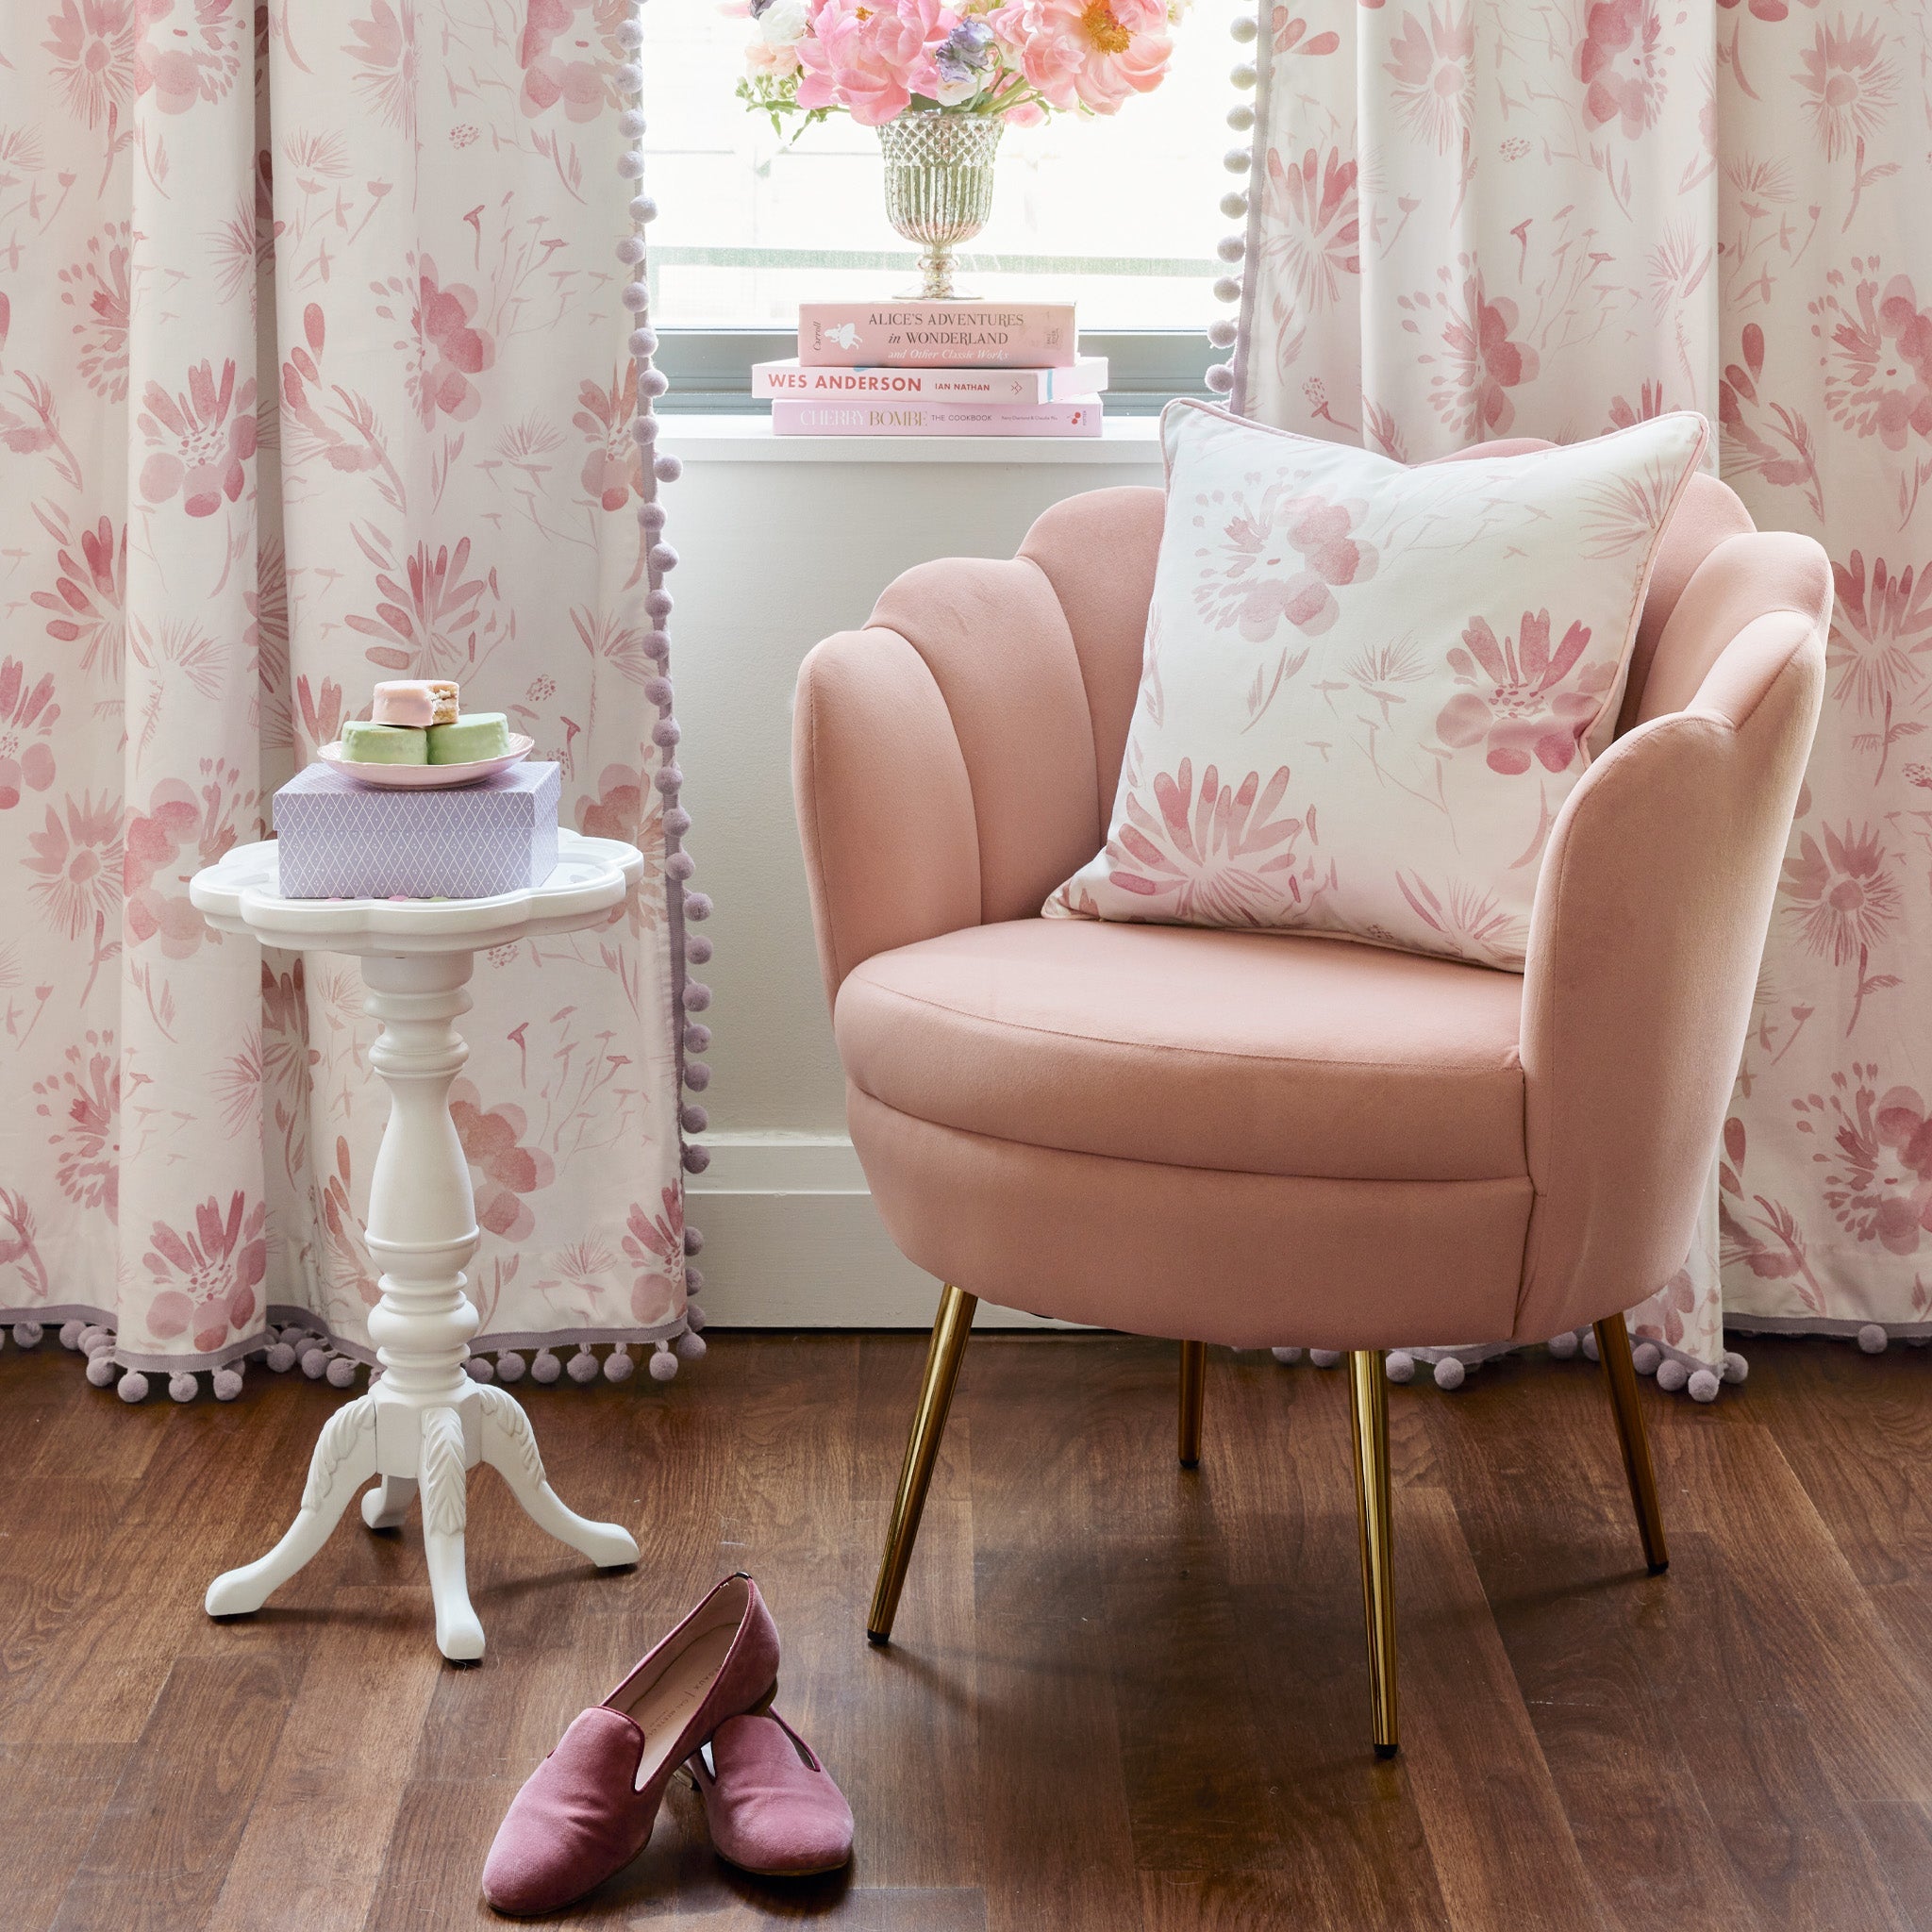 Pink Sofa Chair with Pink Floral Pillow on top and burgundy velvet loafers on the ground by a white small table with a box and dessert plate on top in front of Pink Floral Curtains with books and flower vase on top